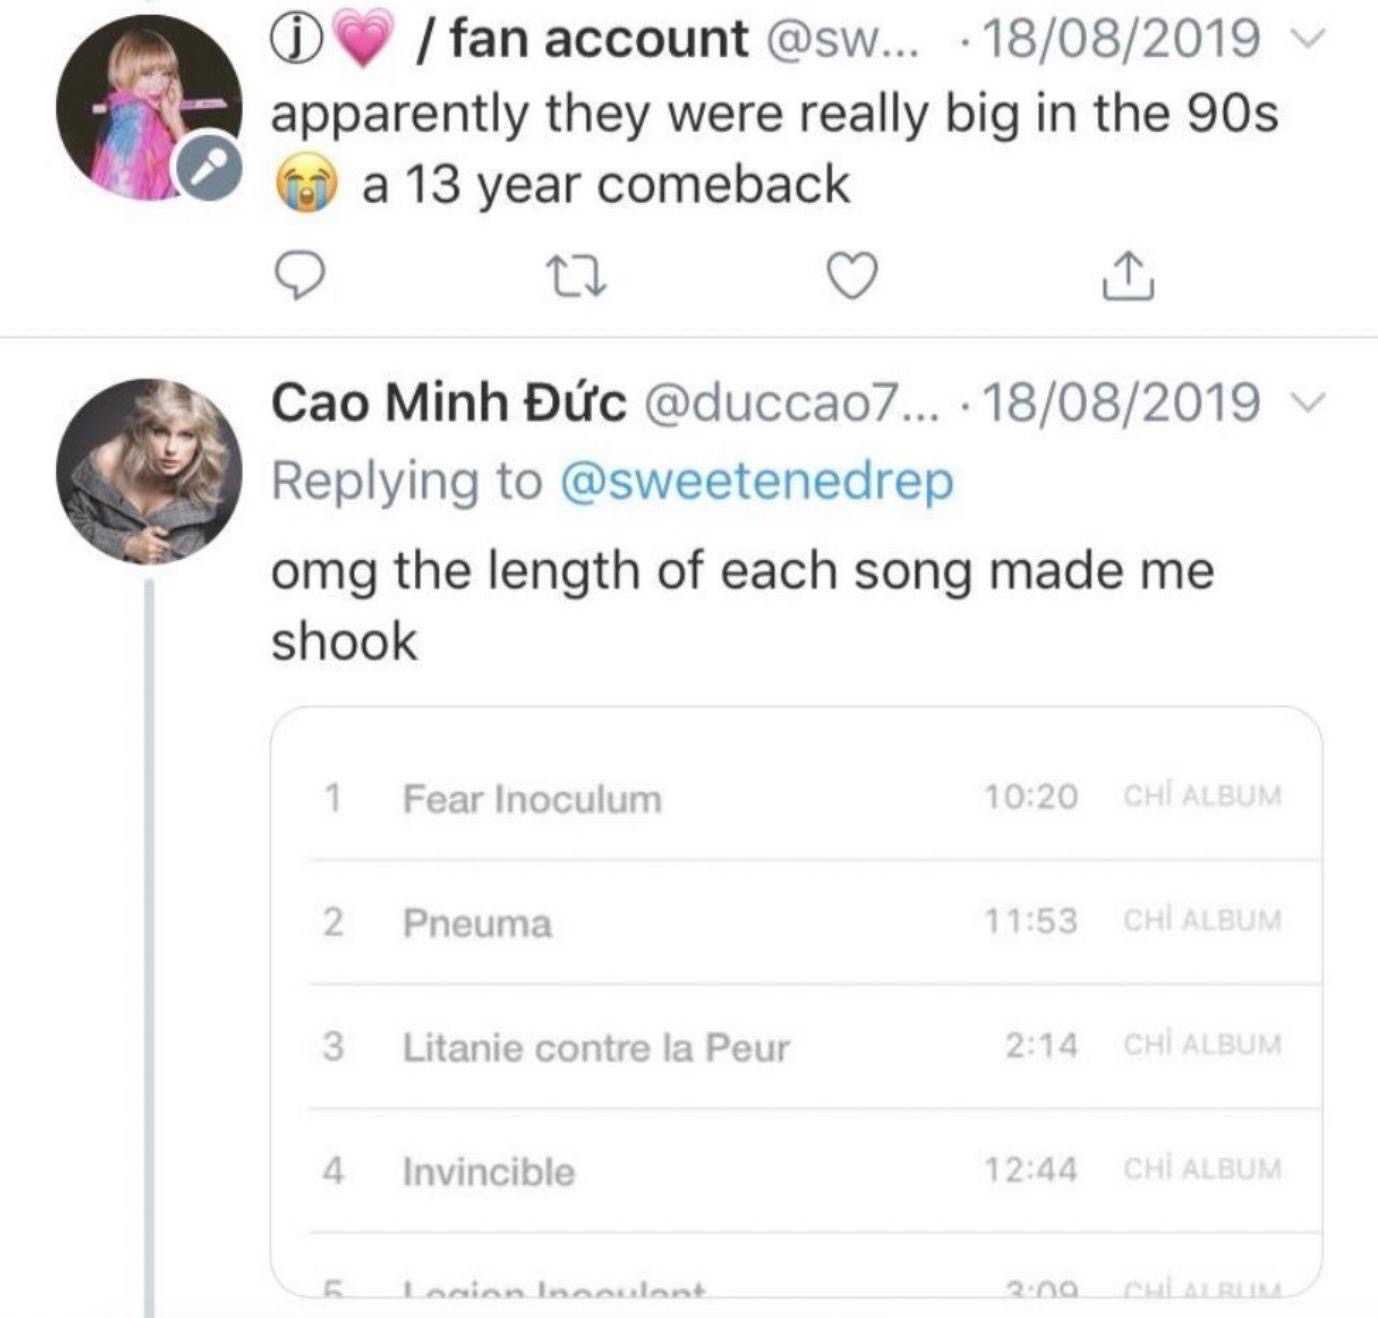 document - D fan account ... 18082019 apparently they were really big in the 90s a 13 year comeback Cao Minh c ... 18082019 , omg the length of each song made me shook 1 Fear Inoculum Chi Album 2 Pneuma Chi Album 3 Litanie contre la Peur Chi Album 4 Invin